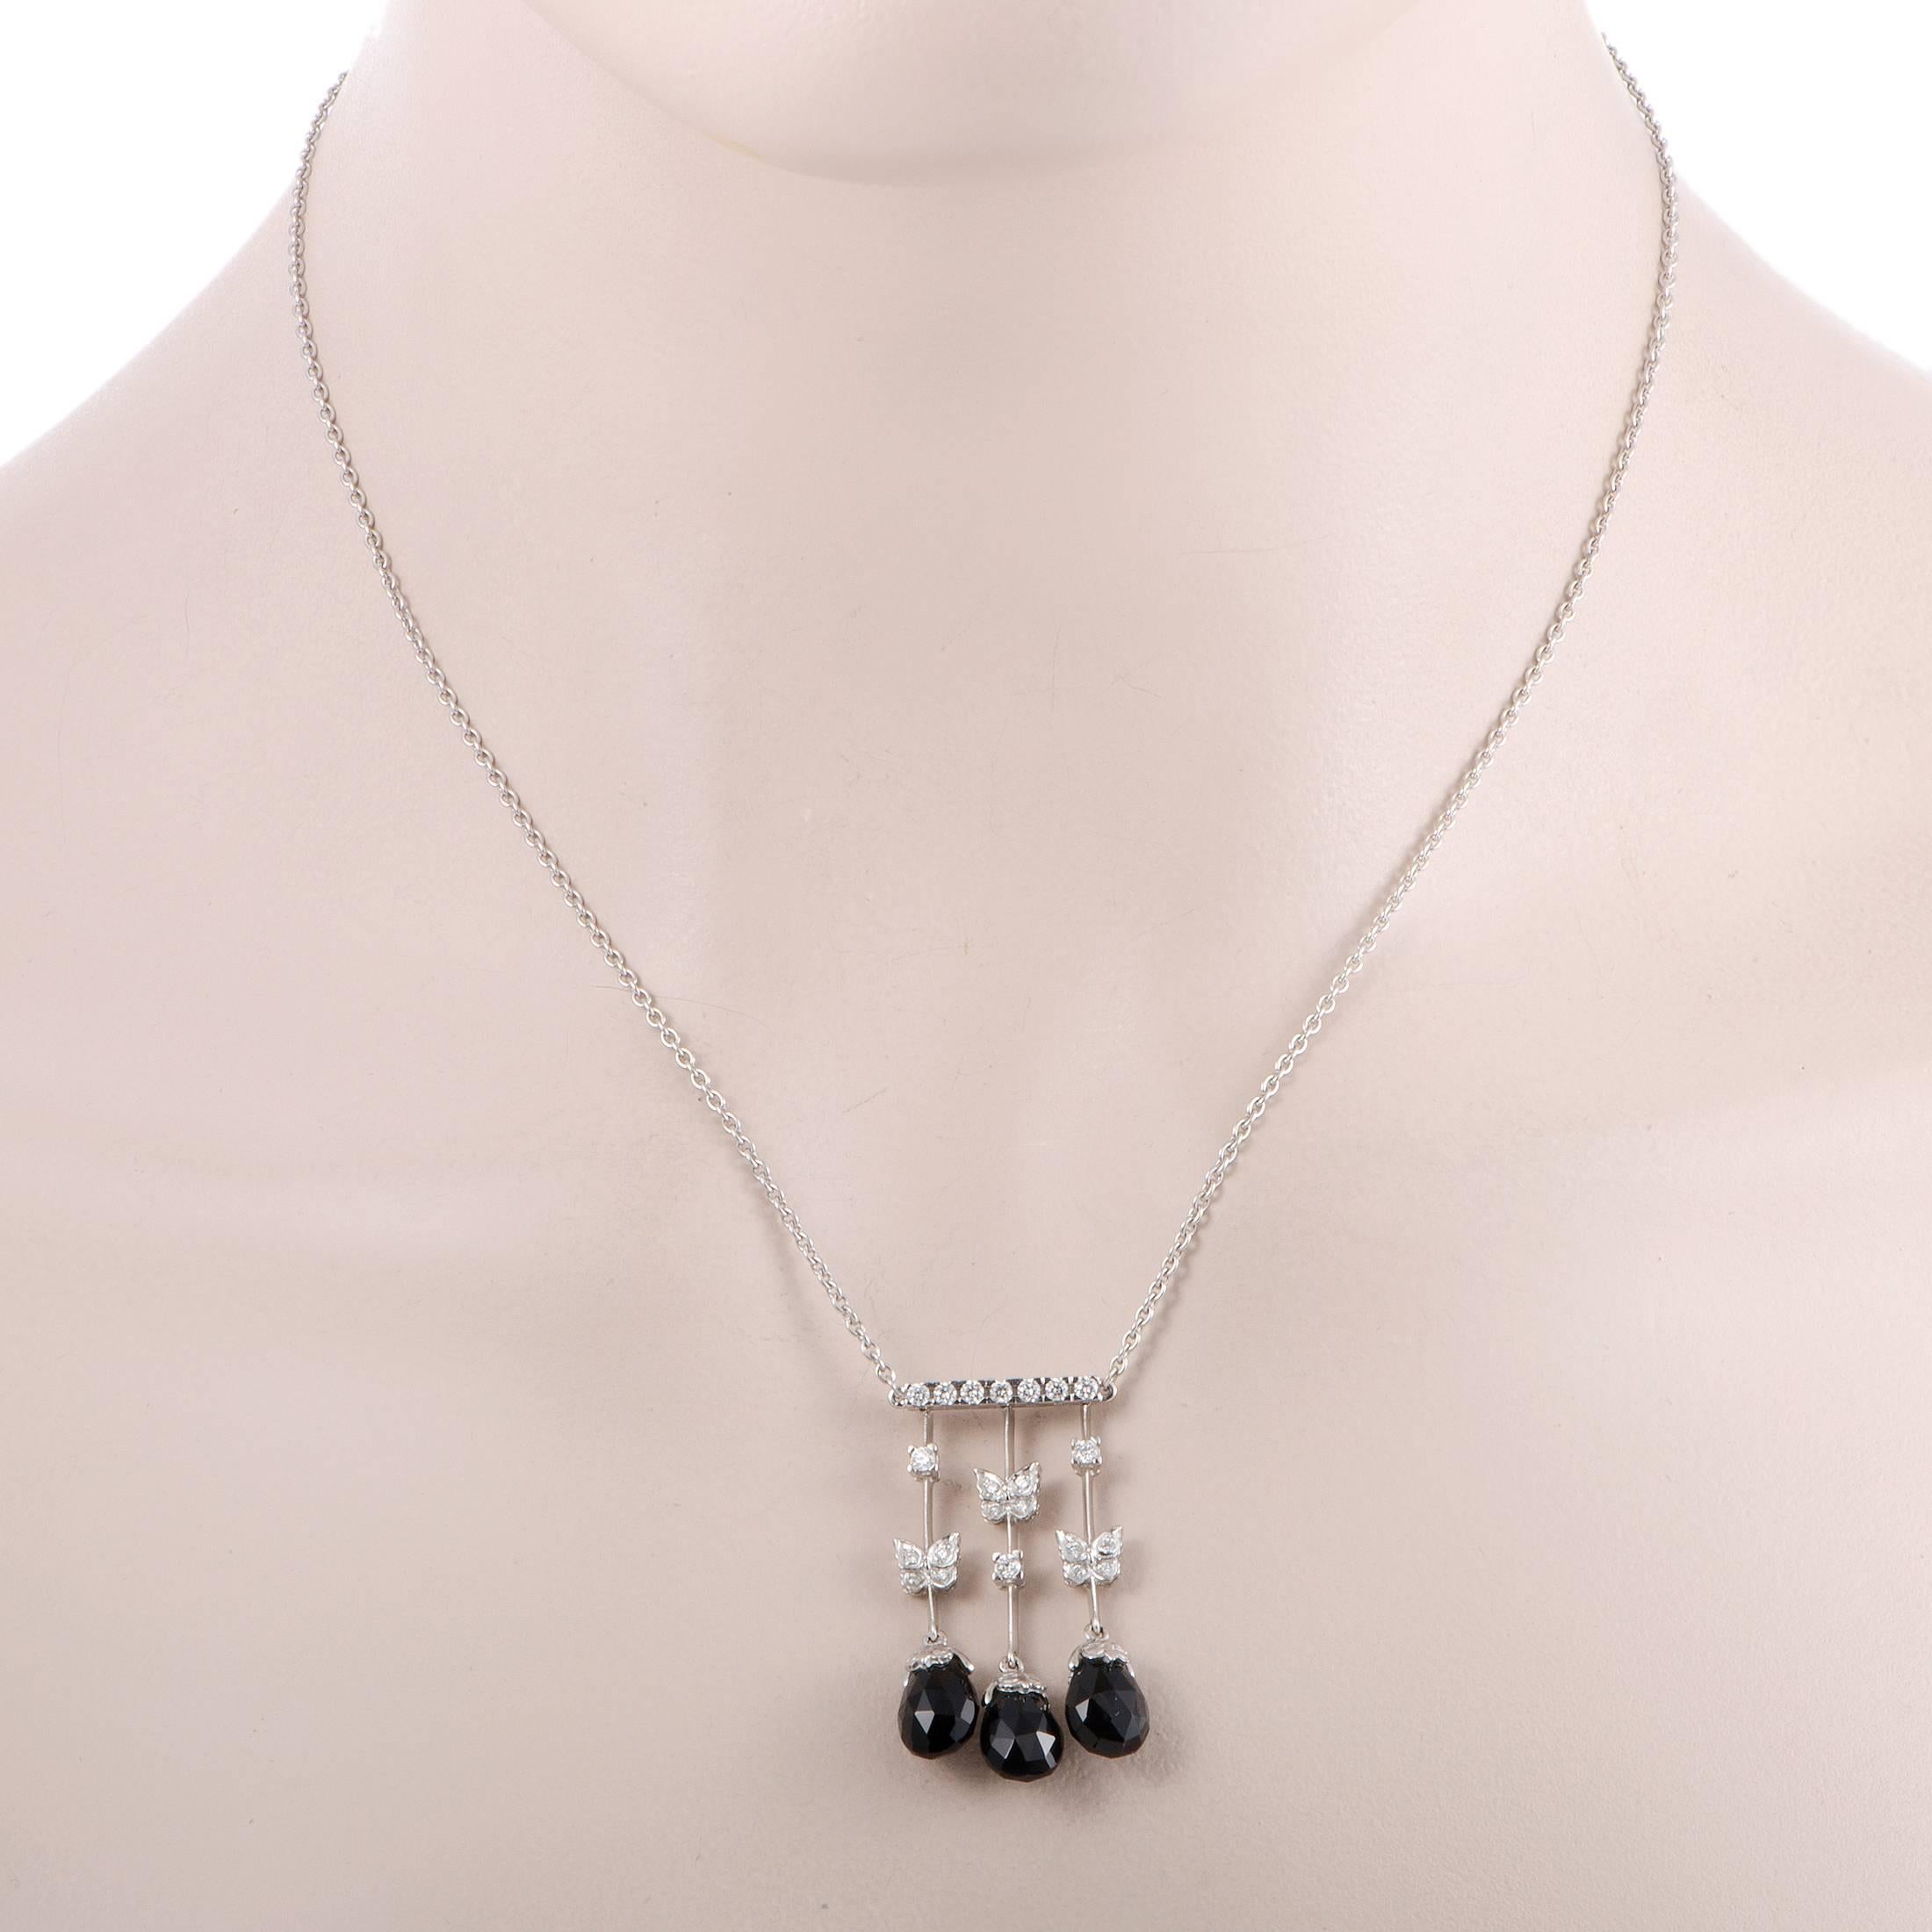 Tastefully designed and made of prestigious 18K white gold, this sublime Carrera y Carrera piece will add a nifty note of elegance to your appearance. The necklace features a gorgeous pendant set with striking onyx and 0.39ct of scintillating